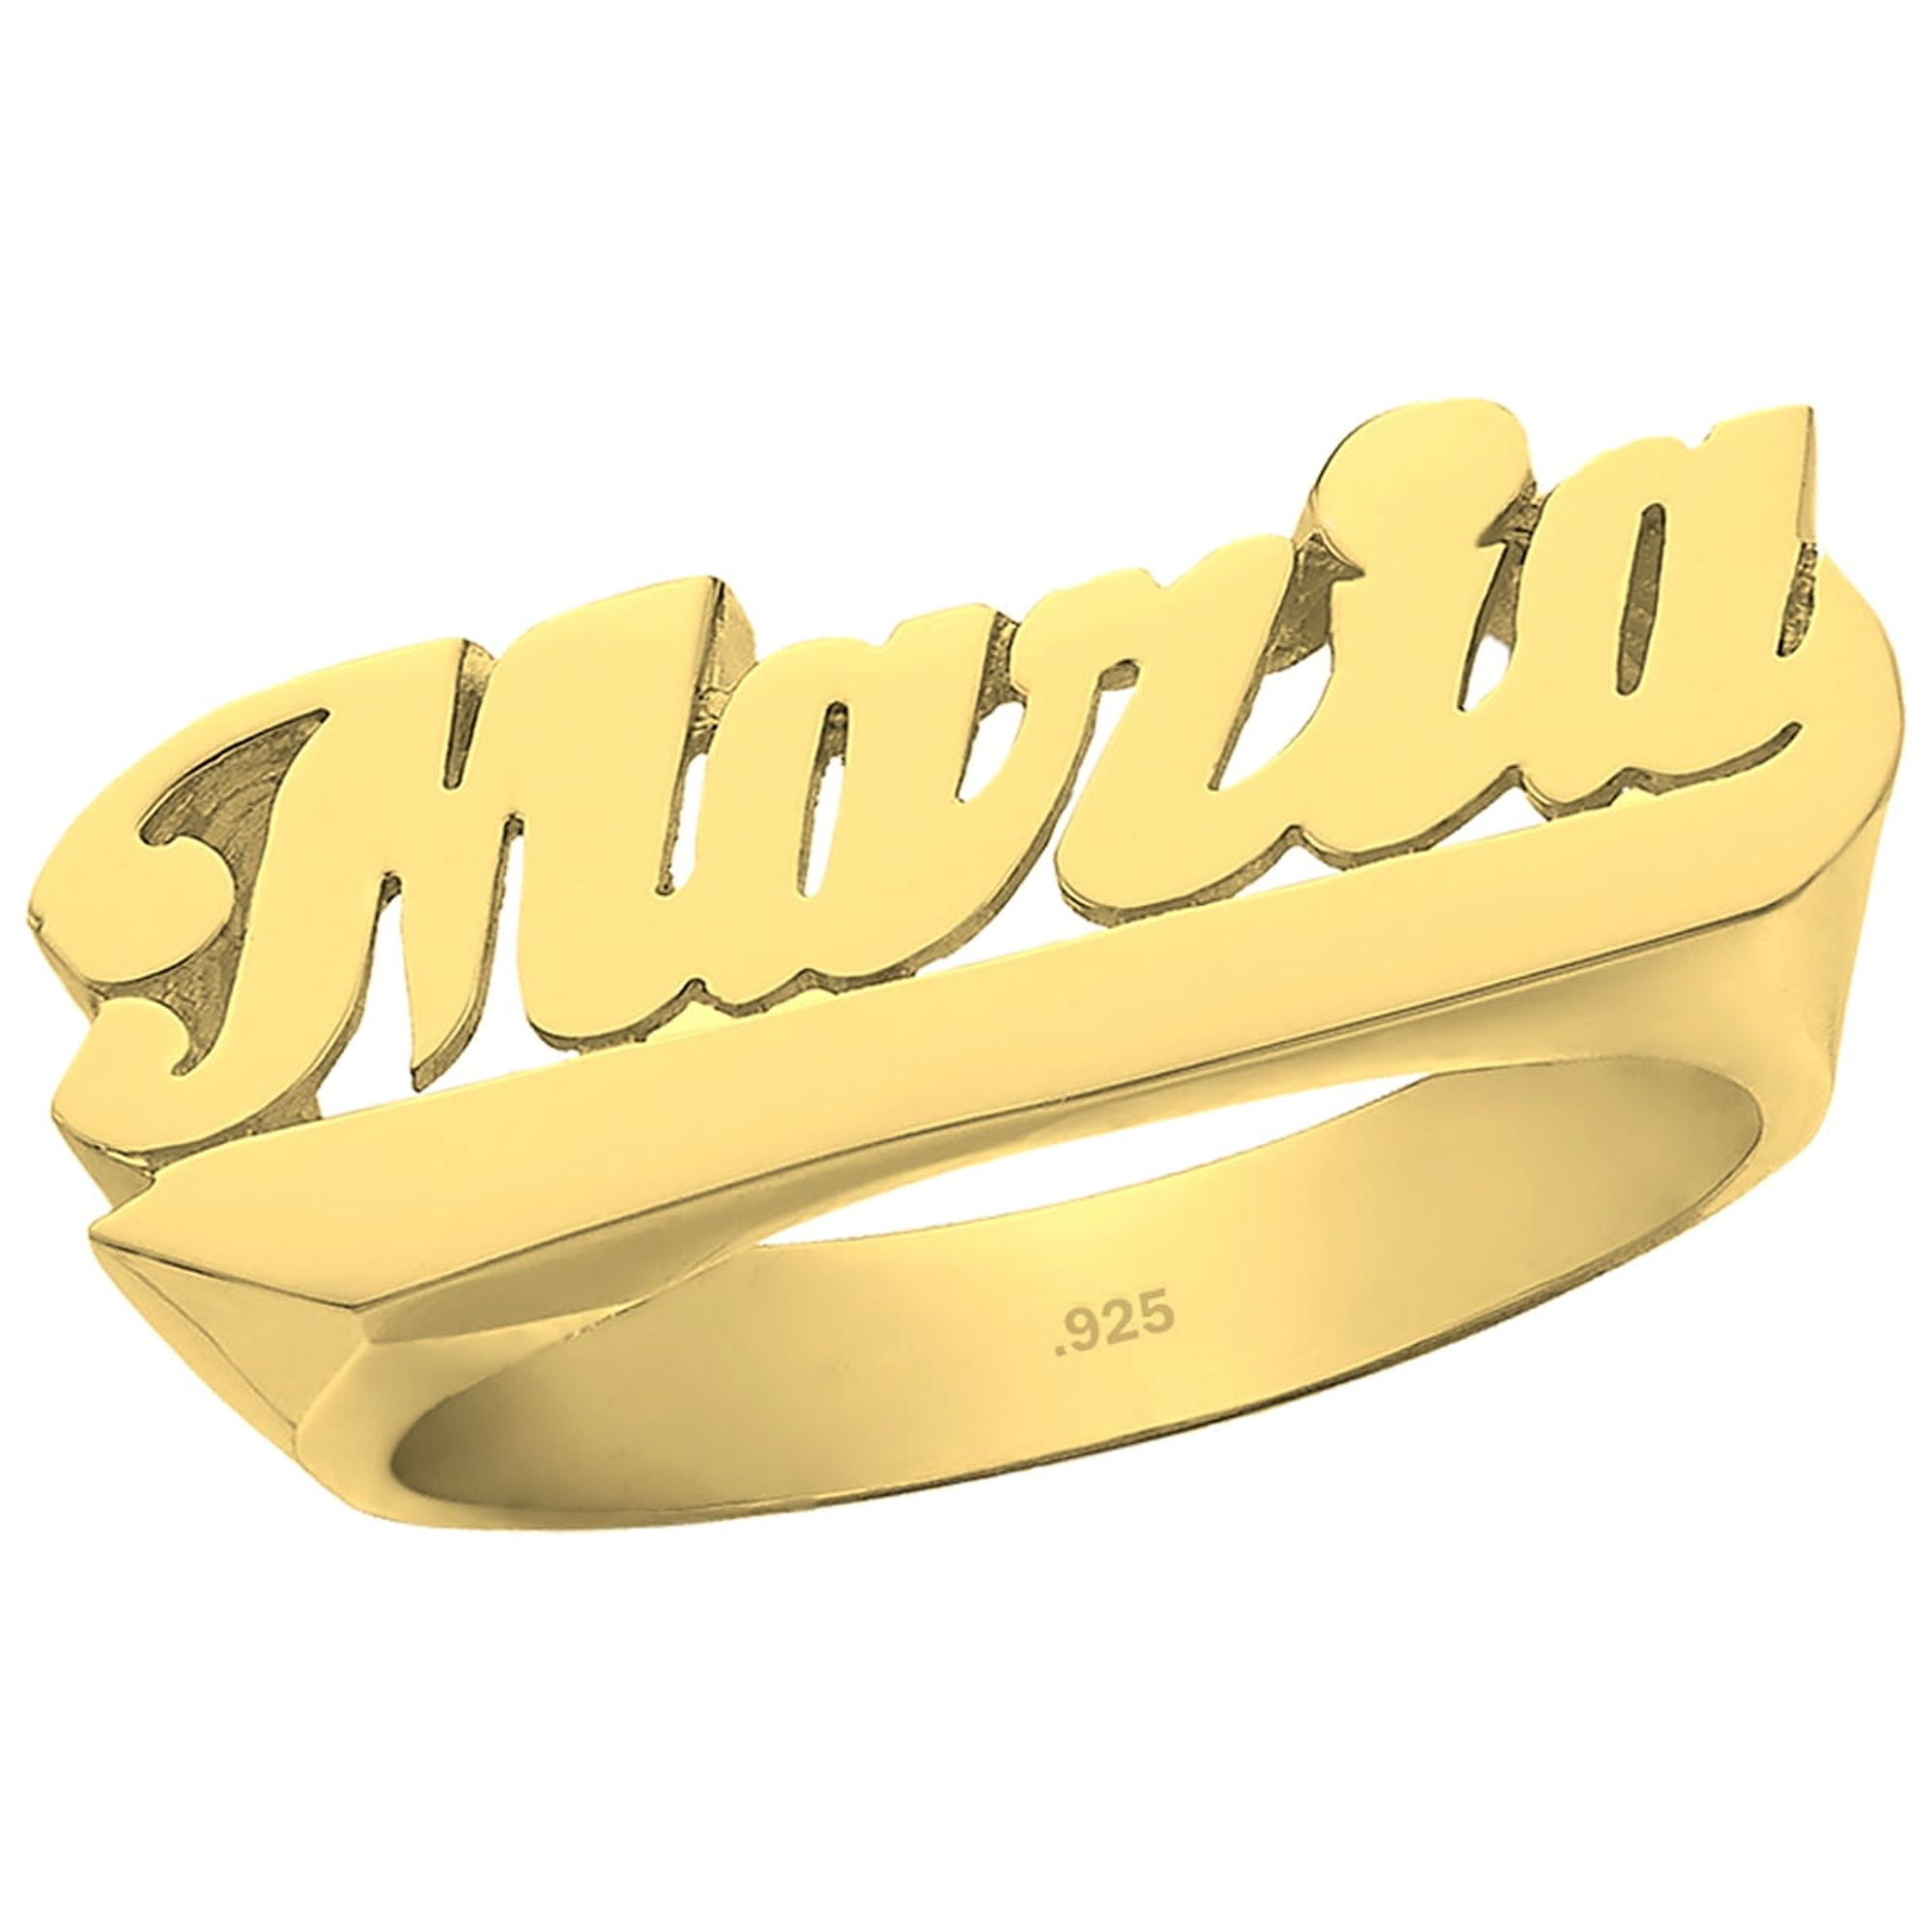 24K Gold Plated Sterling Silver Personalized Name Ring - Bar Design Below  Name - Size 10 - Made in USA - Walmart.com